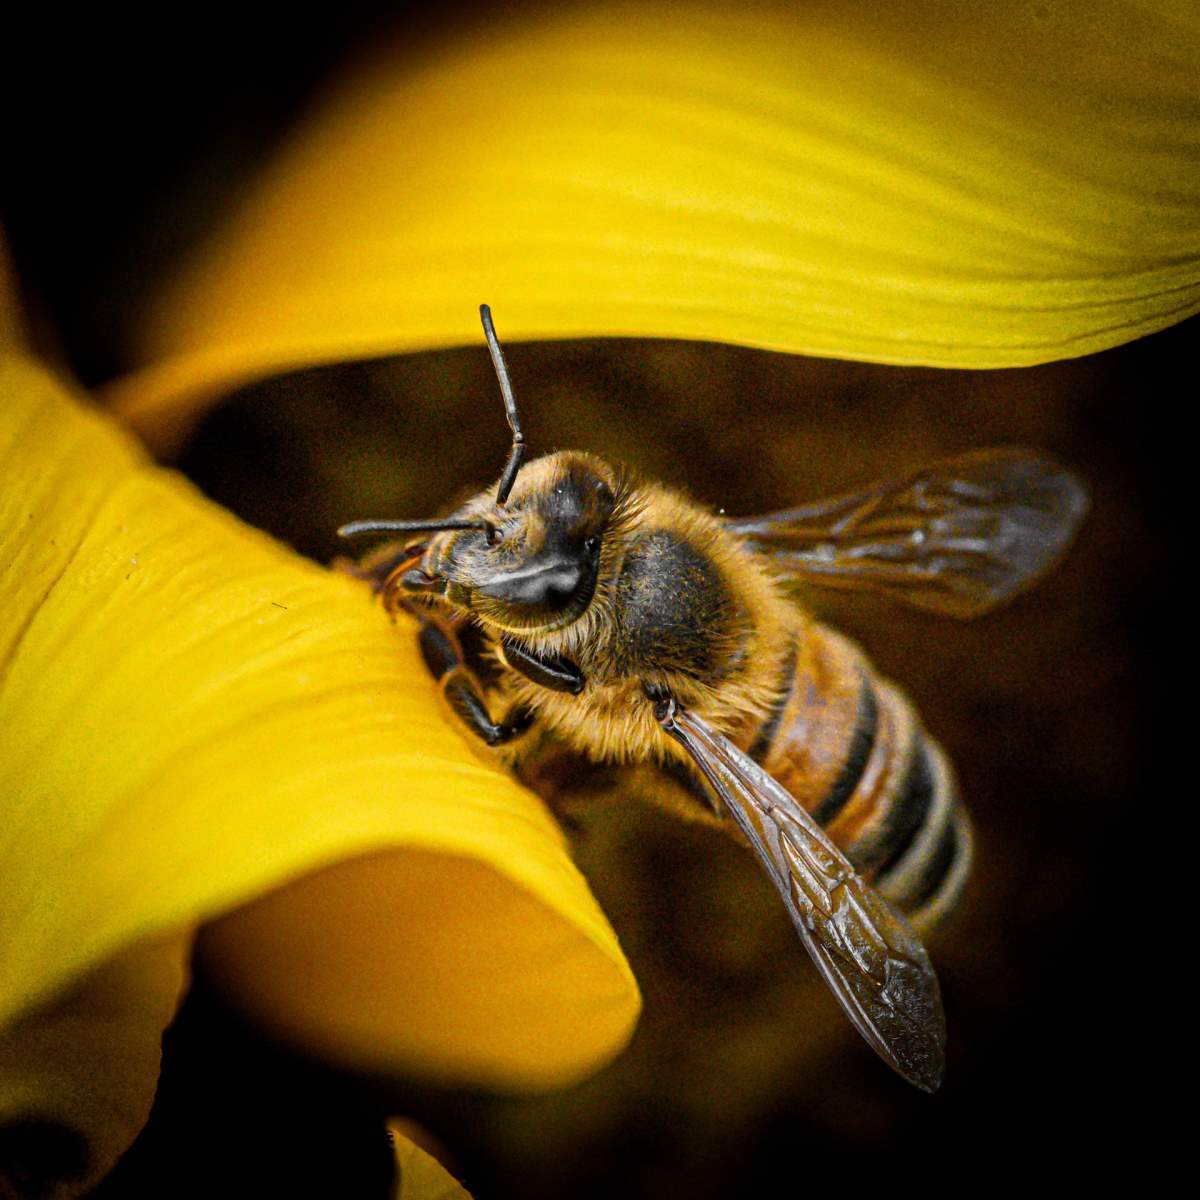 Save the Bees: Importance of Pest Control that Saves Native Pollinators